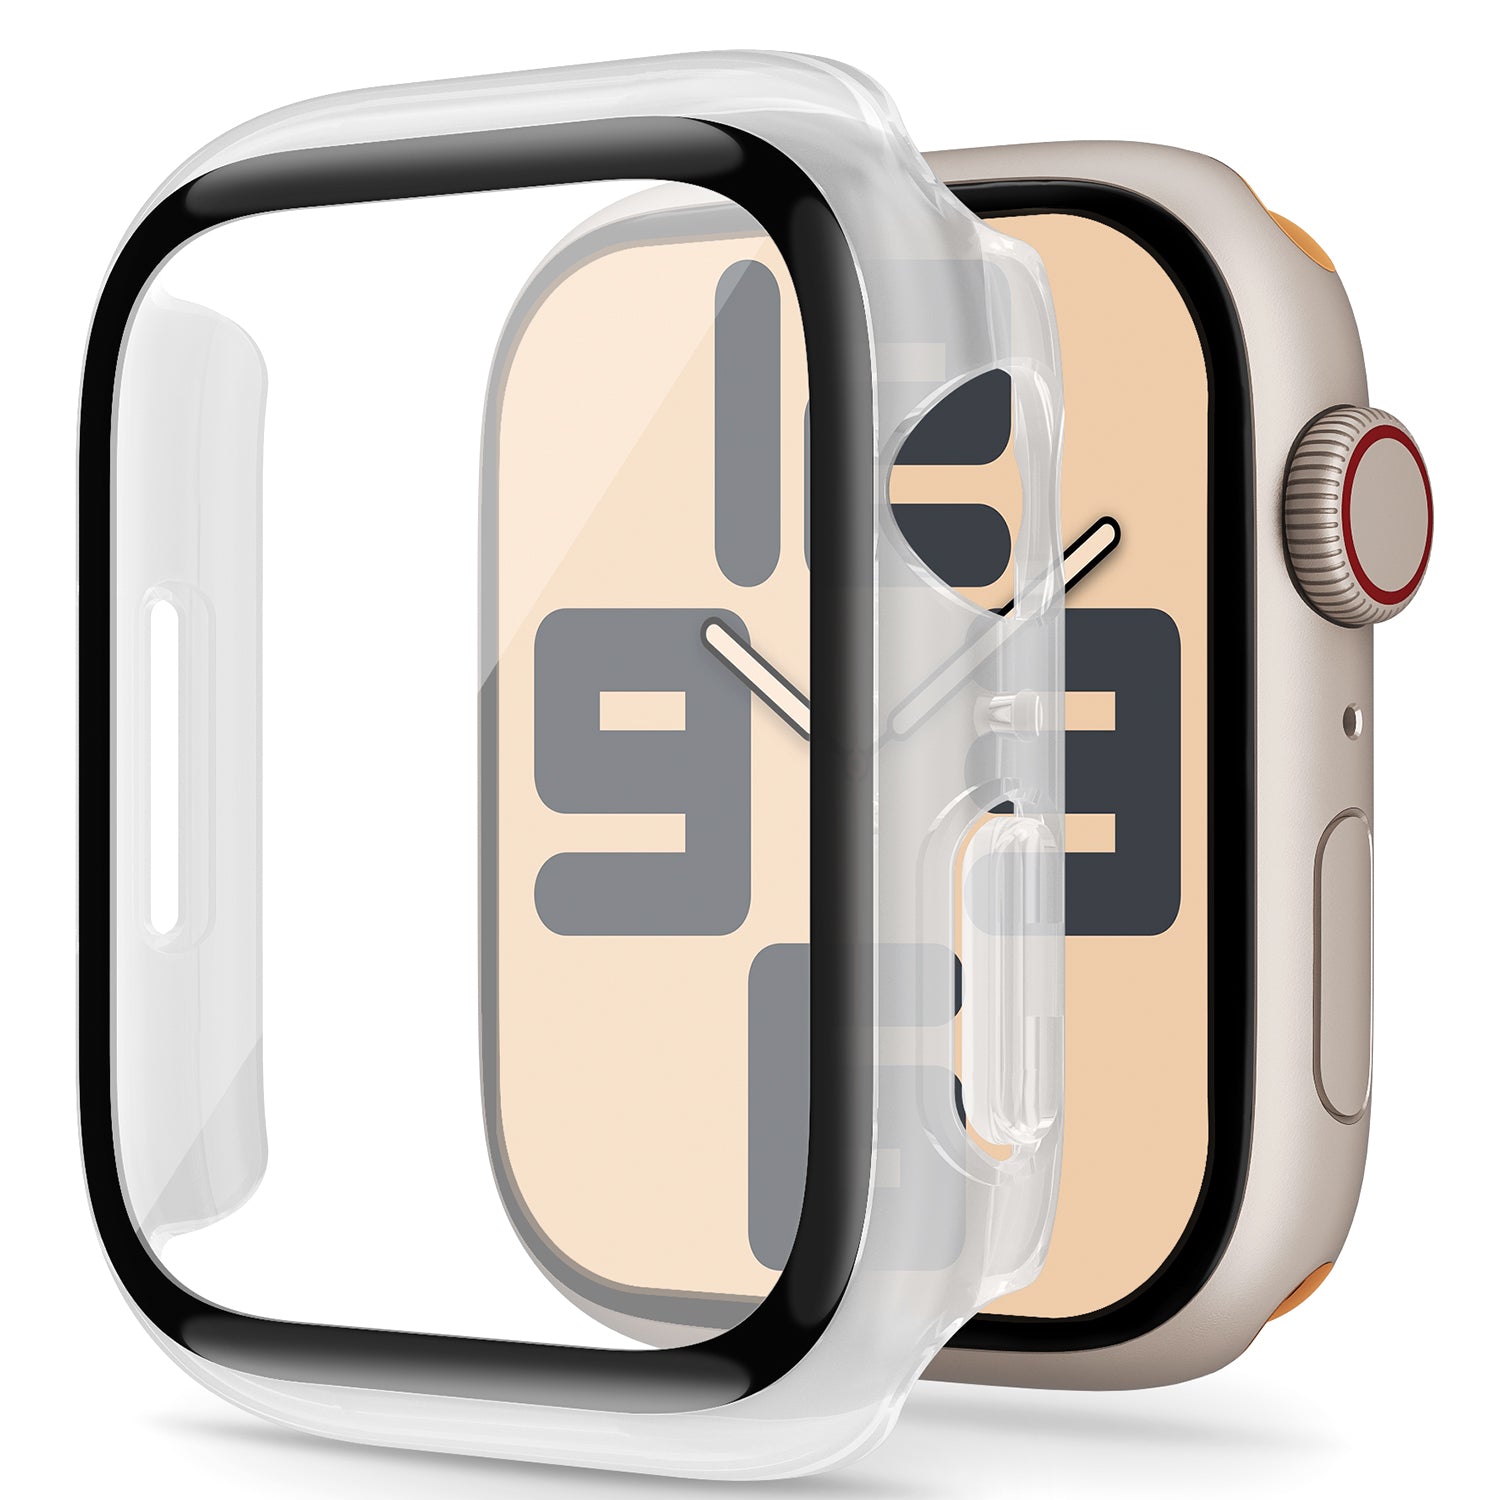 Tough On Apple Watch Case Series 6 / 5 / 4 / SE 40mm with Tempered Glass Screen Protector Clera